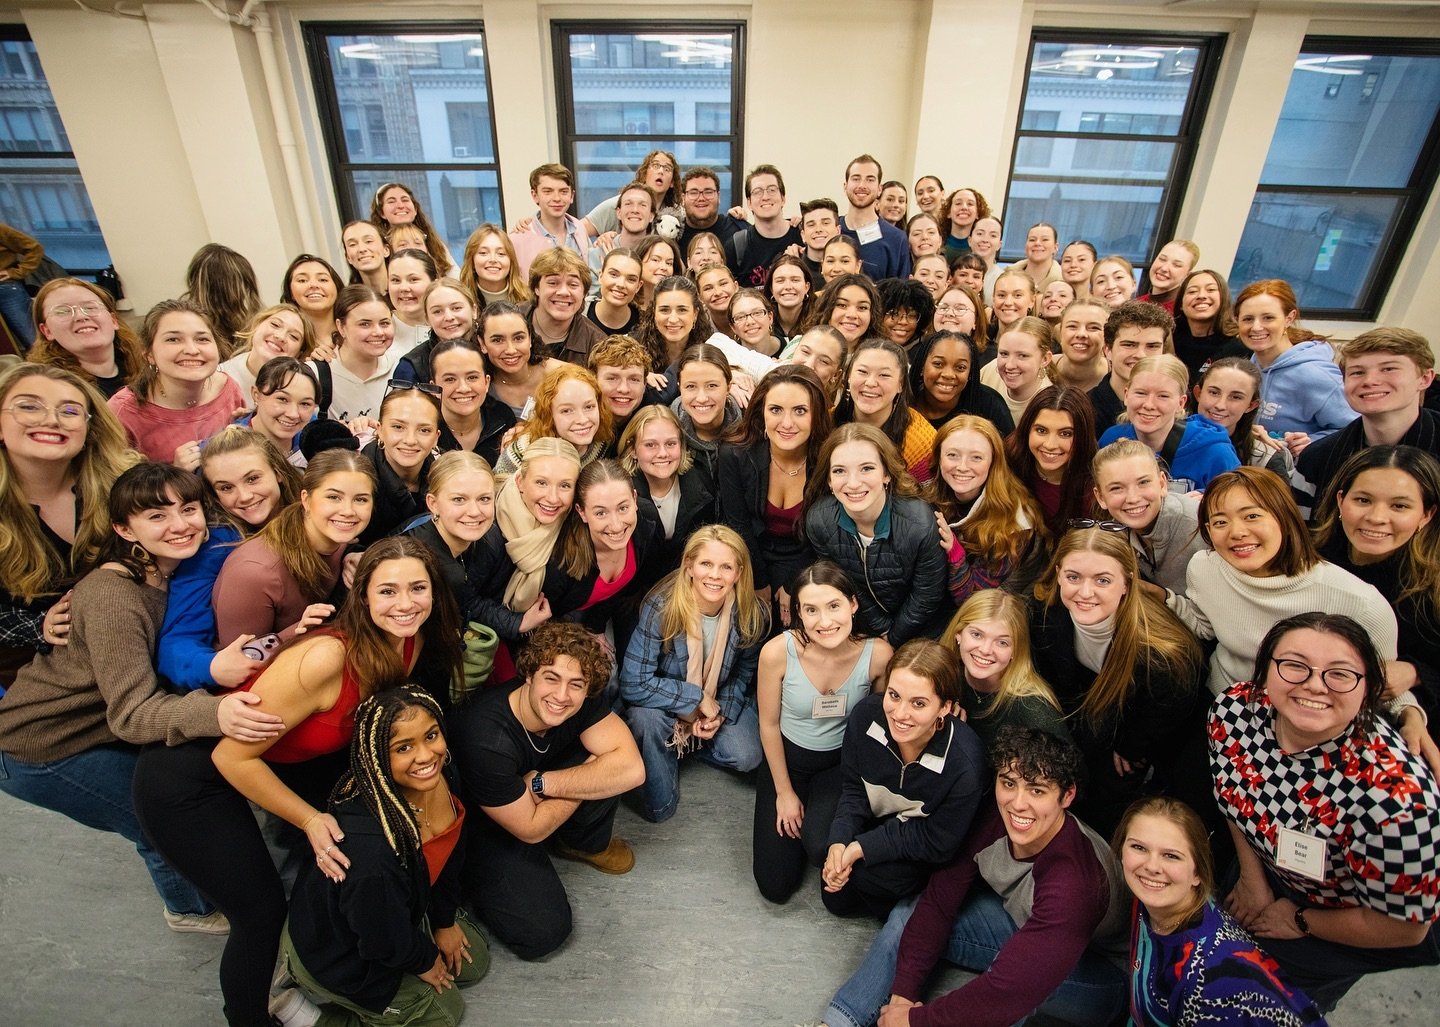 The BEST way to end the week! Thank you to @kelliohara for surprising our students and sending them off with inspiring words of wisdom from a fellow Star. We love our OCUNYC community! ⭐️